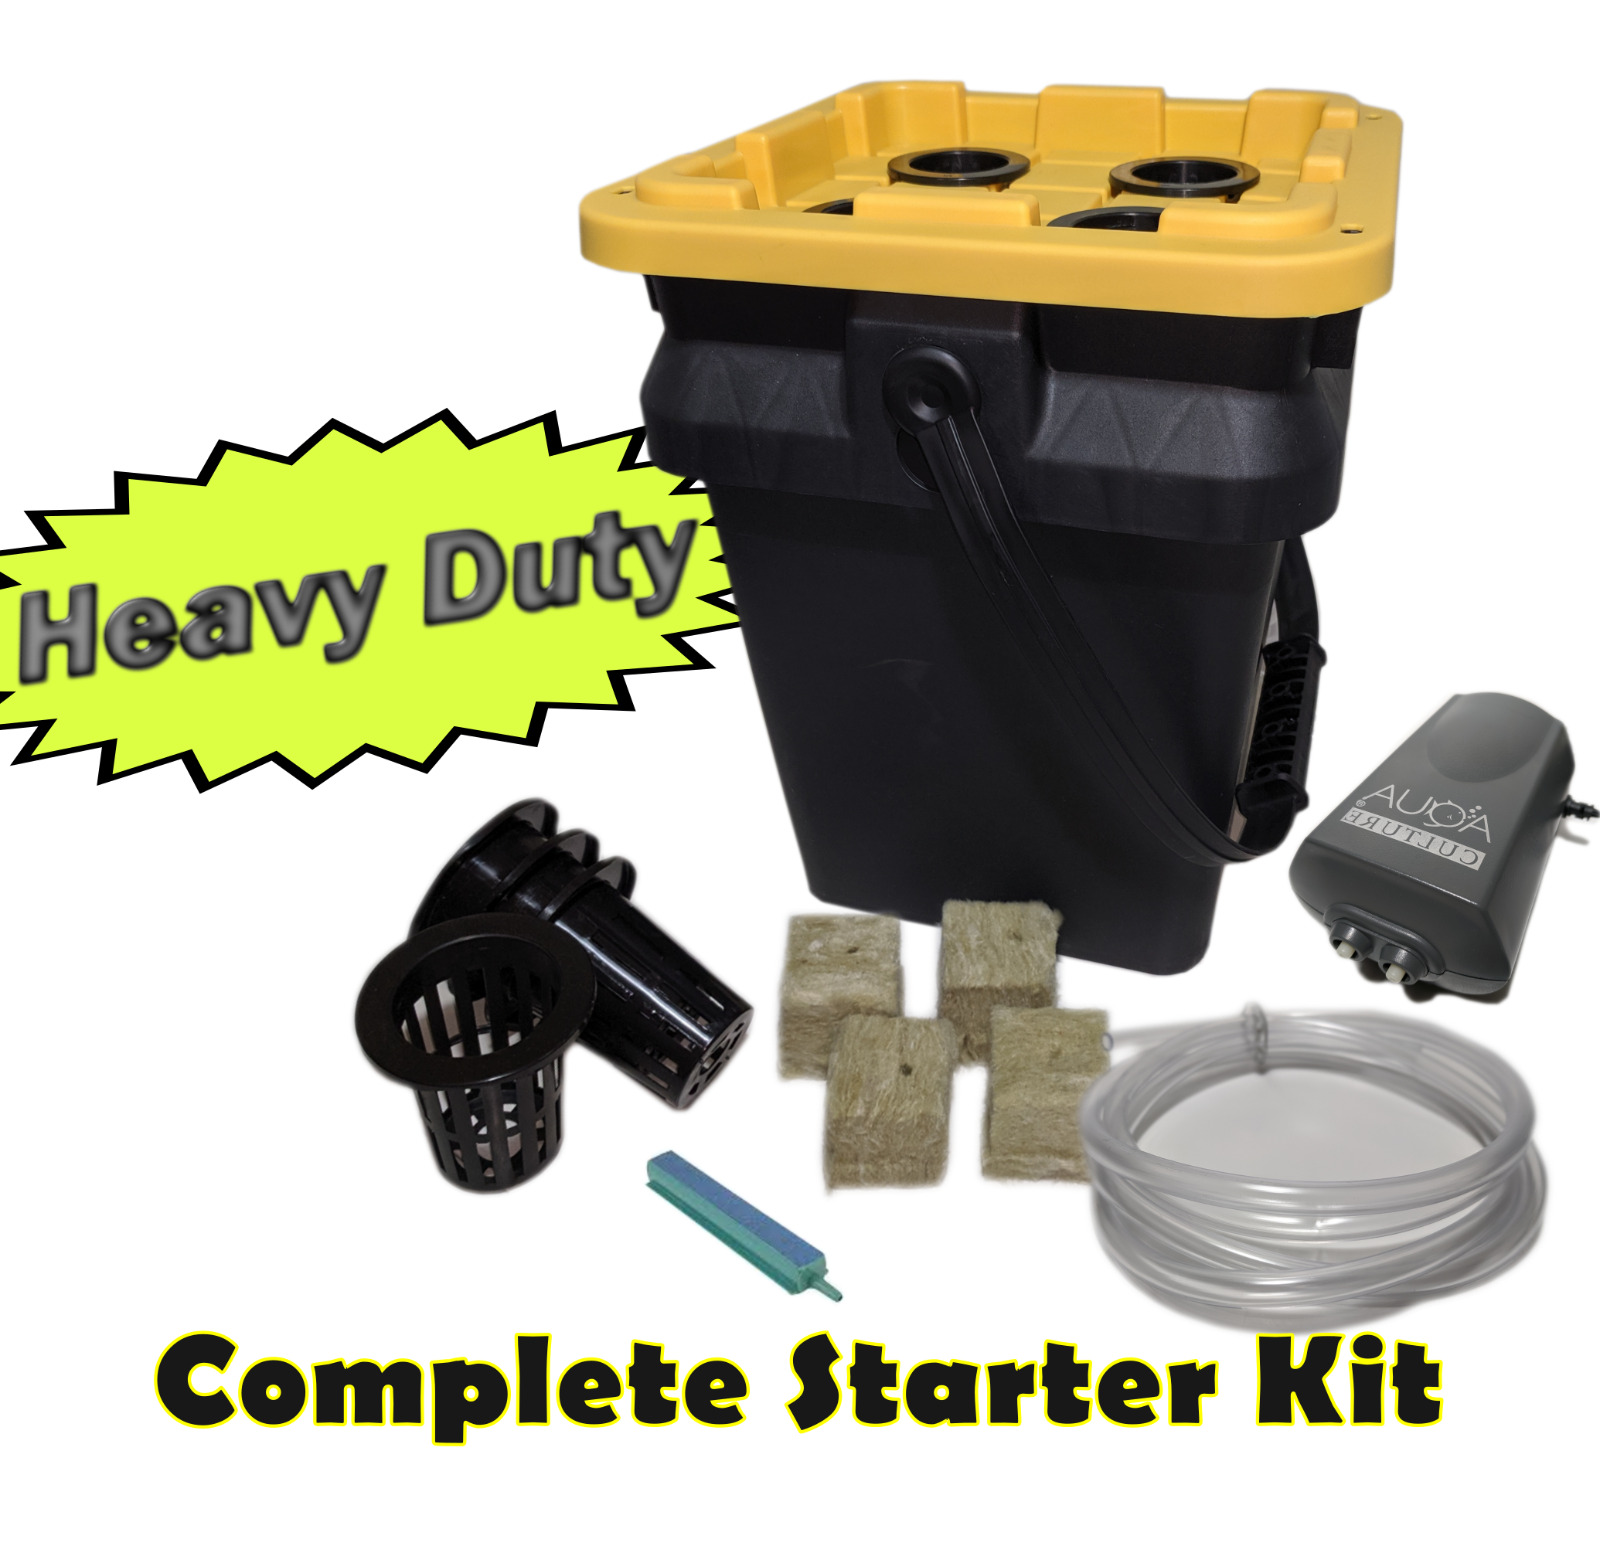 5 gallon square Deep Water Culture, Complete Hydroponics Grow Kit